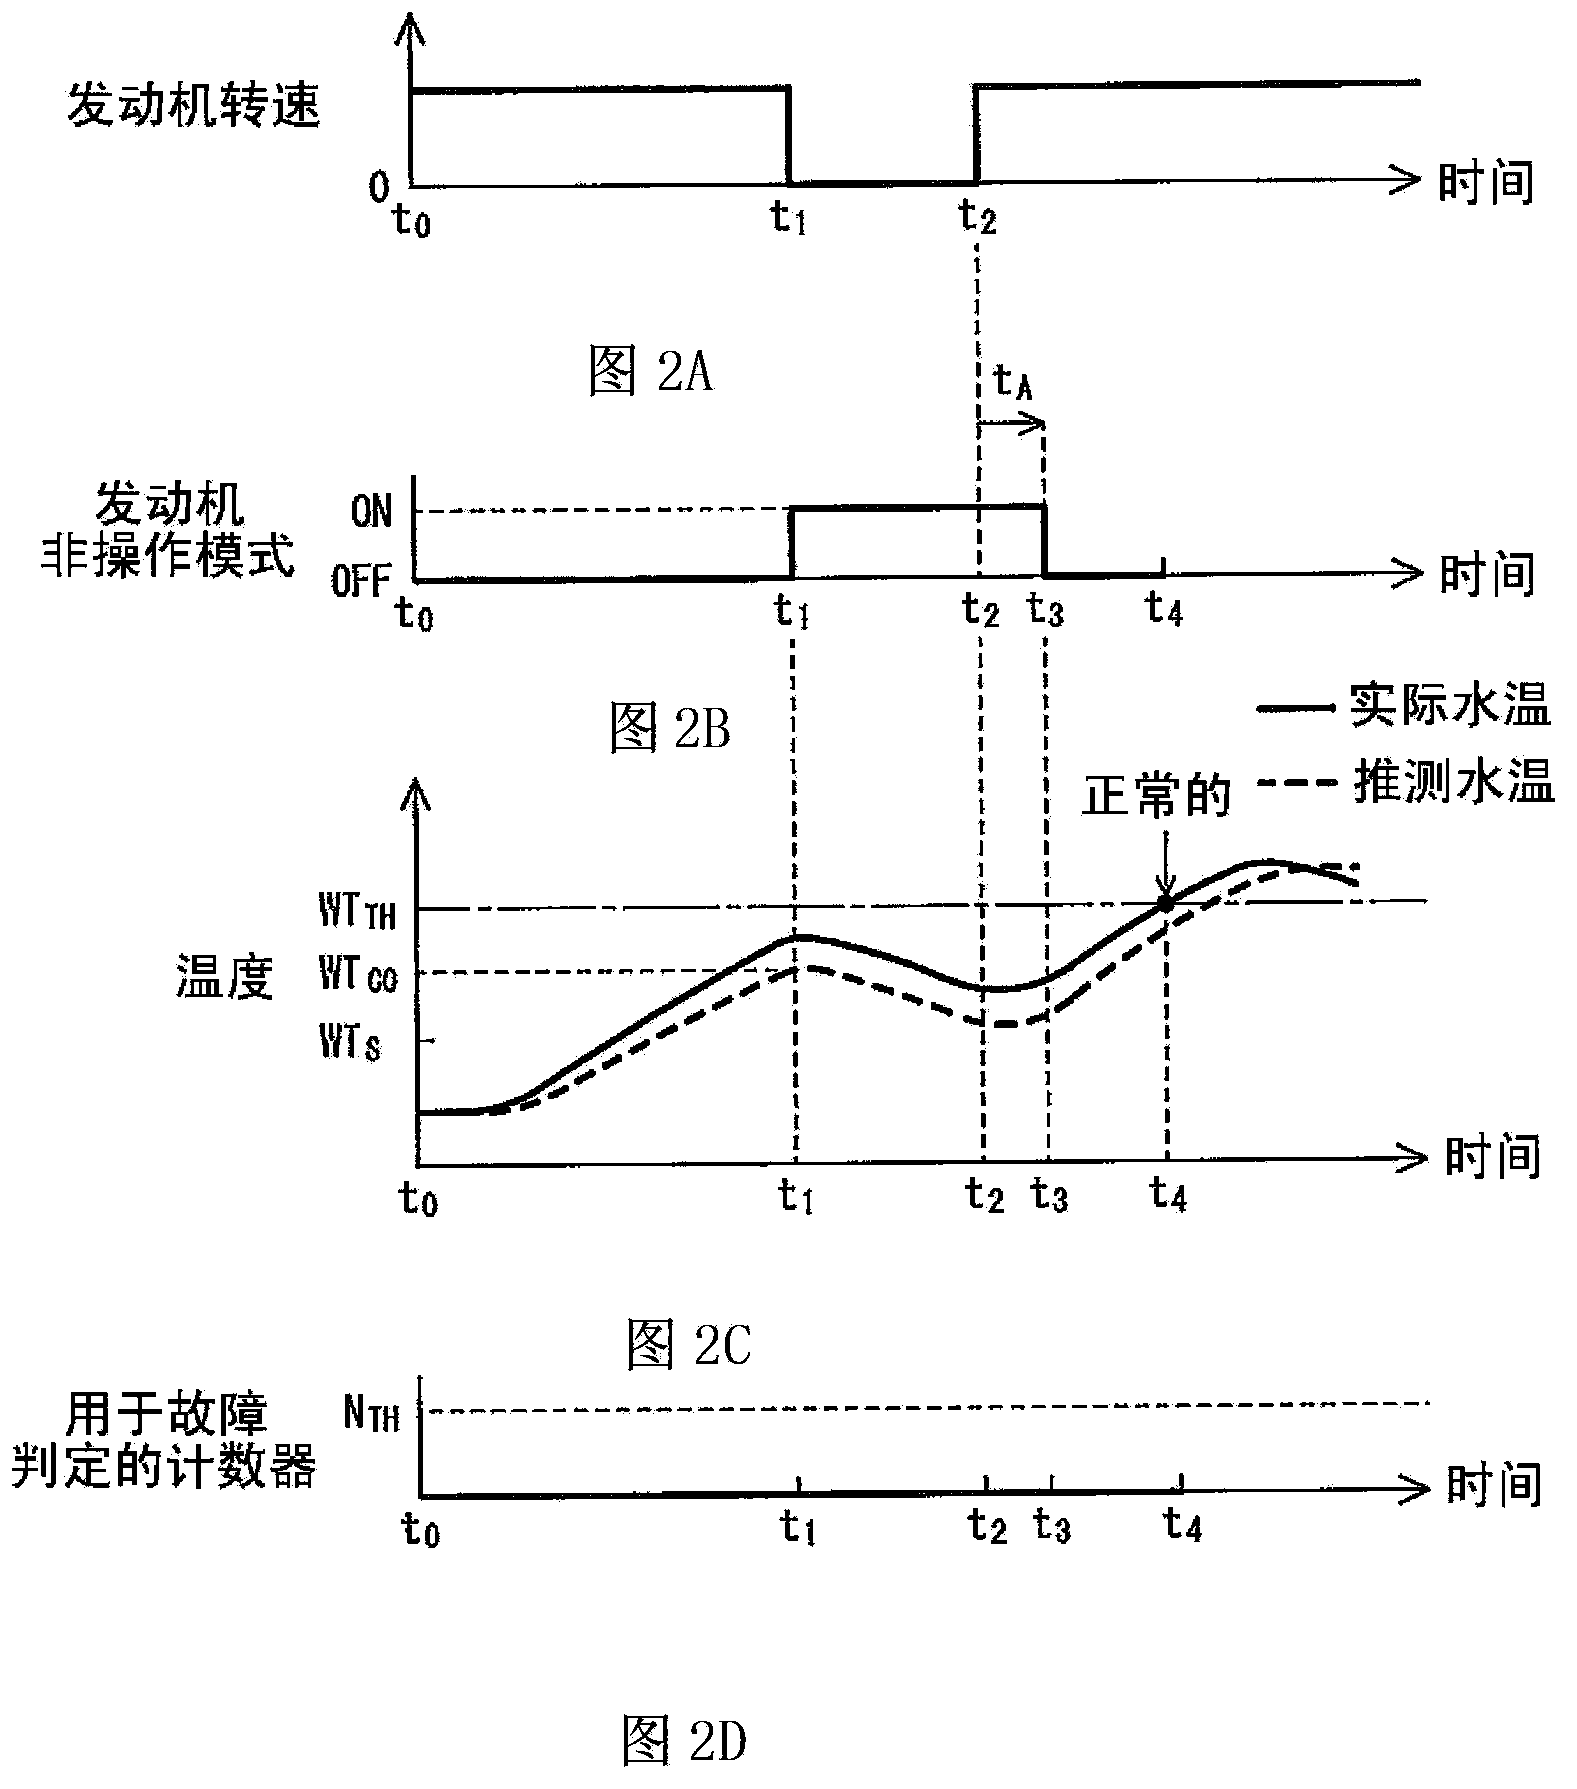 Apparatus and method of determining failure in thermostat